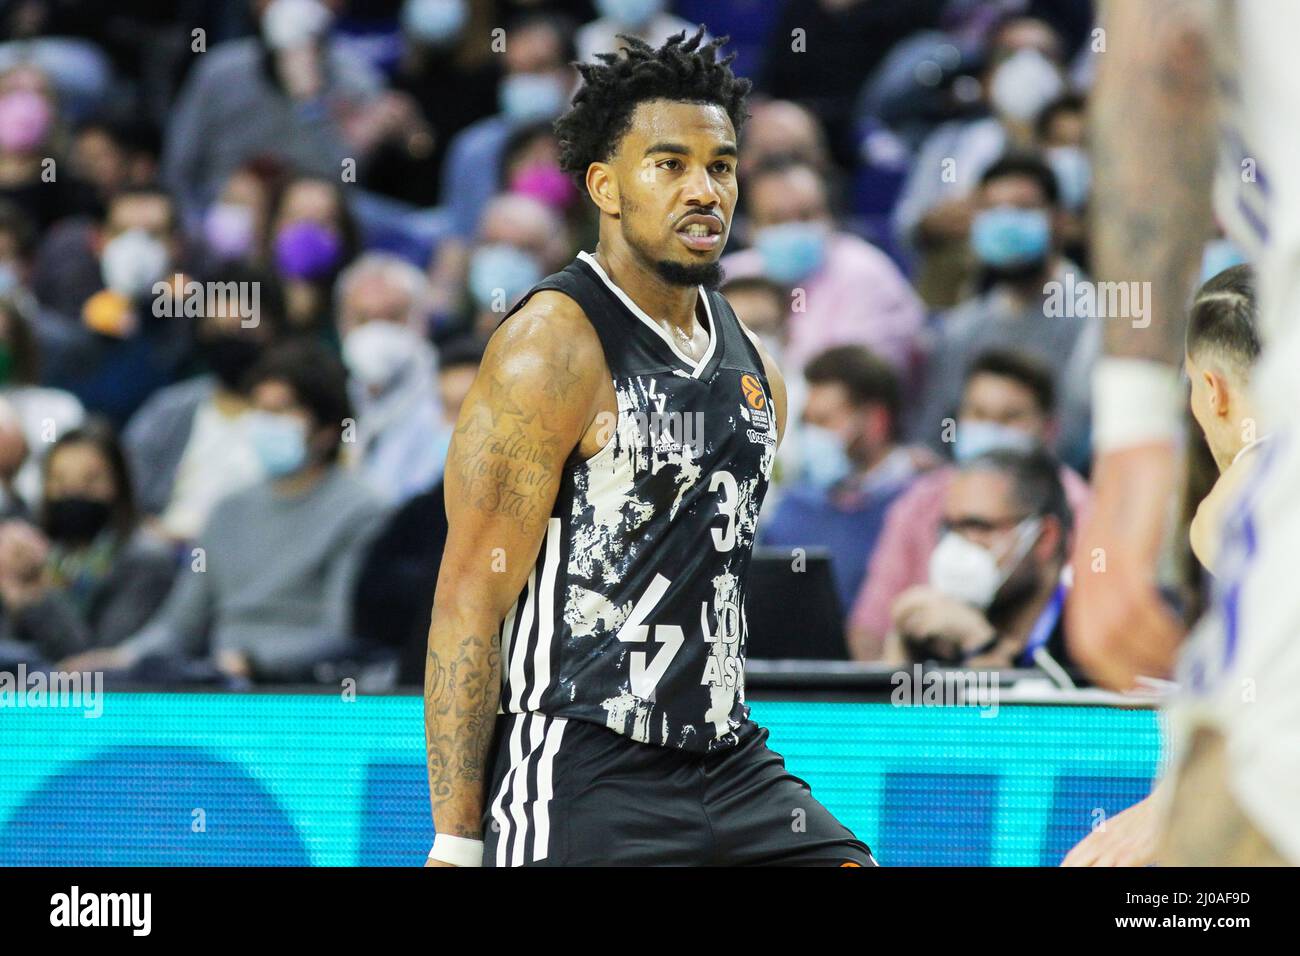 Madrid, Spain. 17th Mar, 2022. Chris Jones of Asvel Lyon-Villeurbanne during the Turkish Airlines Euroleague basketball match between Real Madrid and Asvel Lyon-Villeurbanne on march 17, 2022 at Wizink Center in Madrid, Spain Credit: Independent Photo Agency/Alamy Live Newss Stock Photo